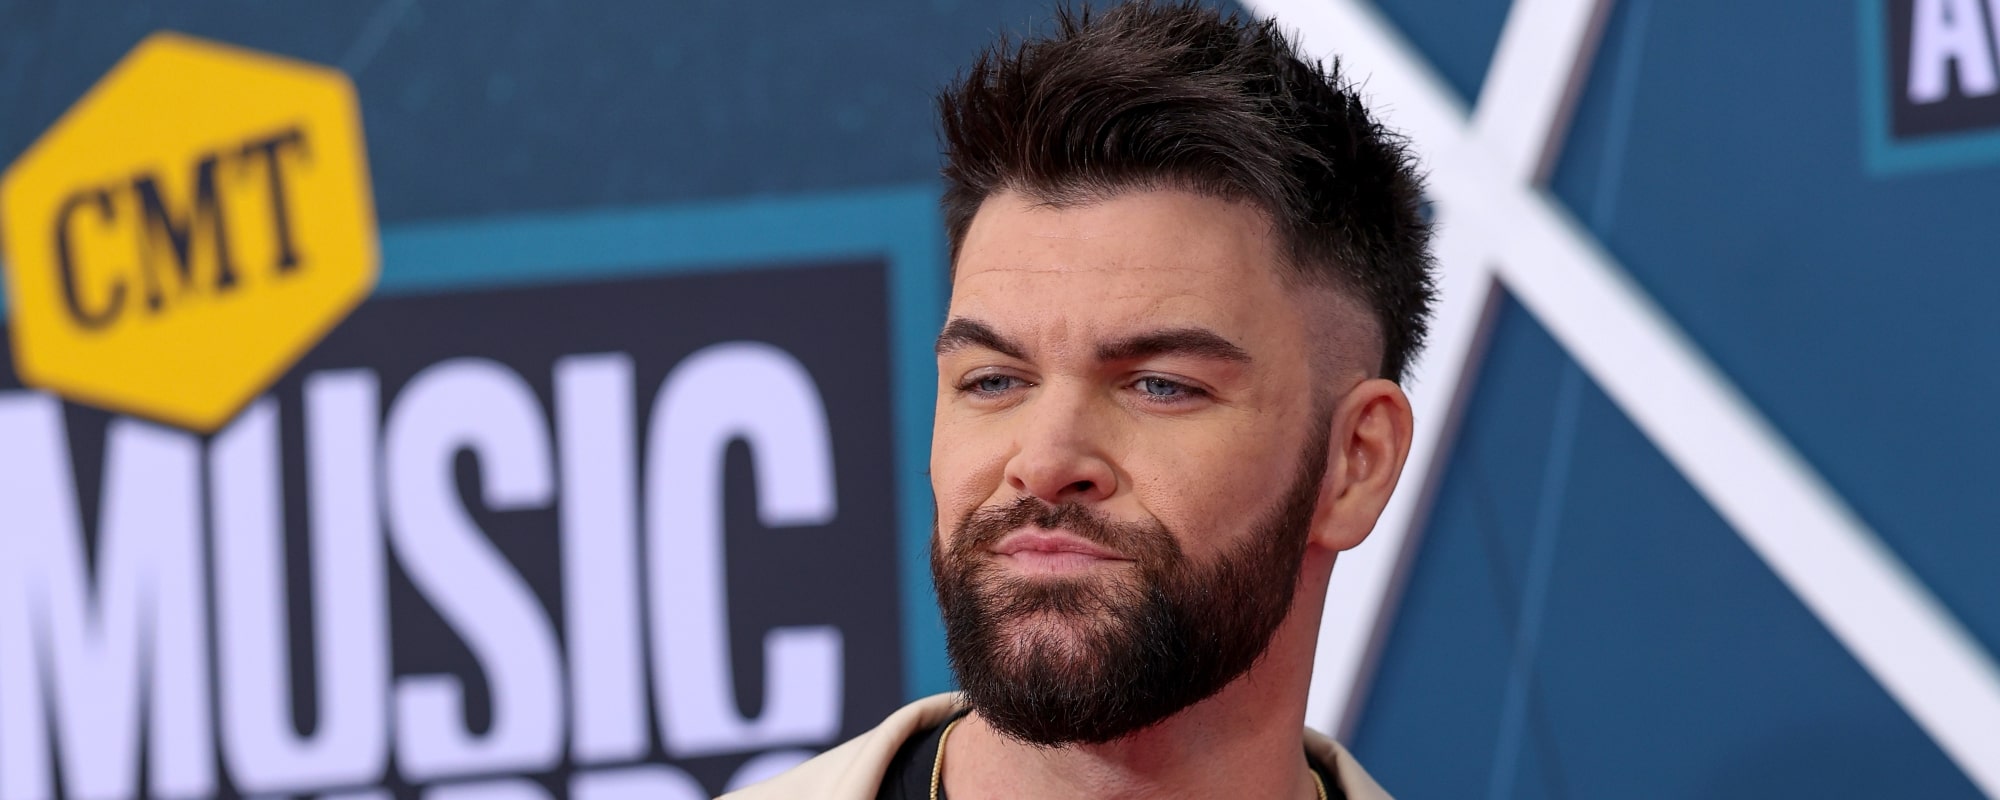 Dylan Scott Has Fans in Their Feels Over His Masterful Cover of “The Most Iconic Song in Country Music”